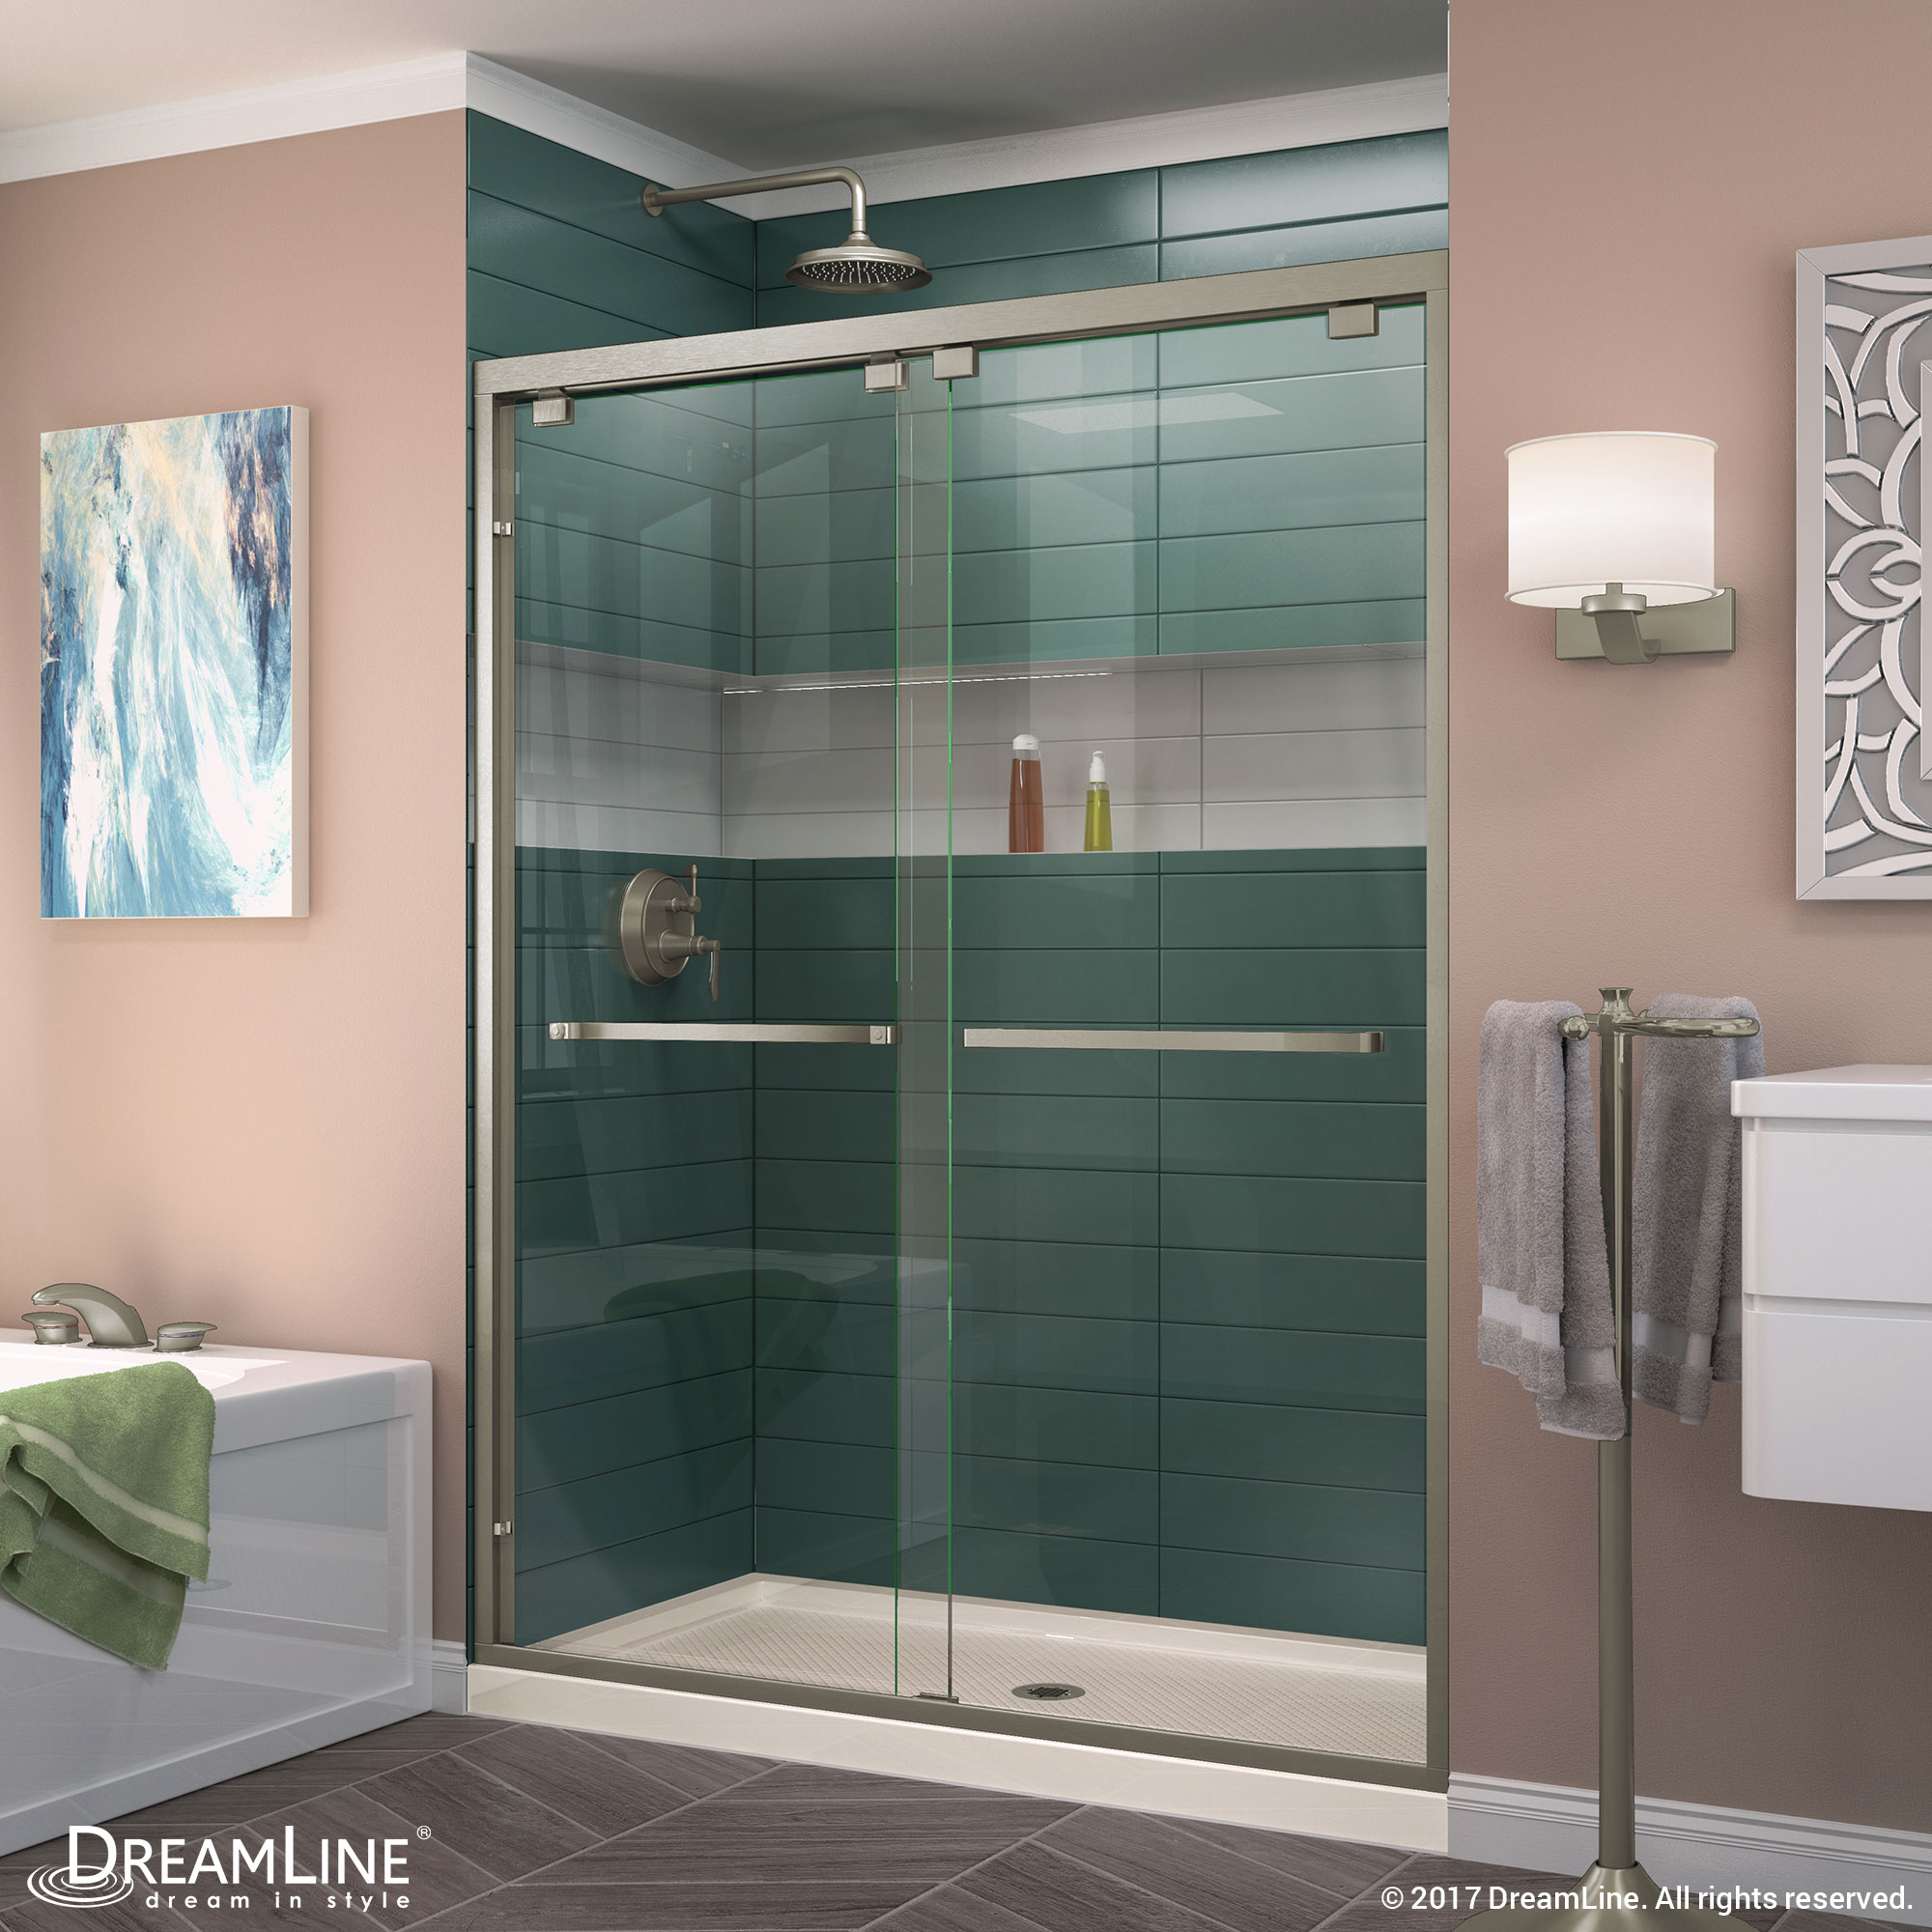 DreamLine Encore 32 in. D x 60 in. W x 78 3/4 in. H Bypass Shower Door in Chrome and Center Drain Biscuit Base Kit